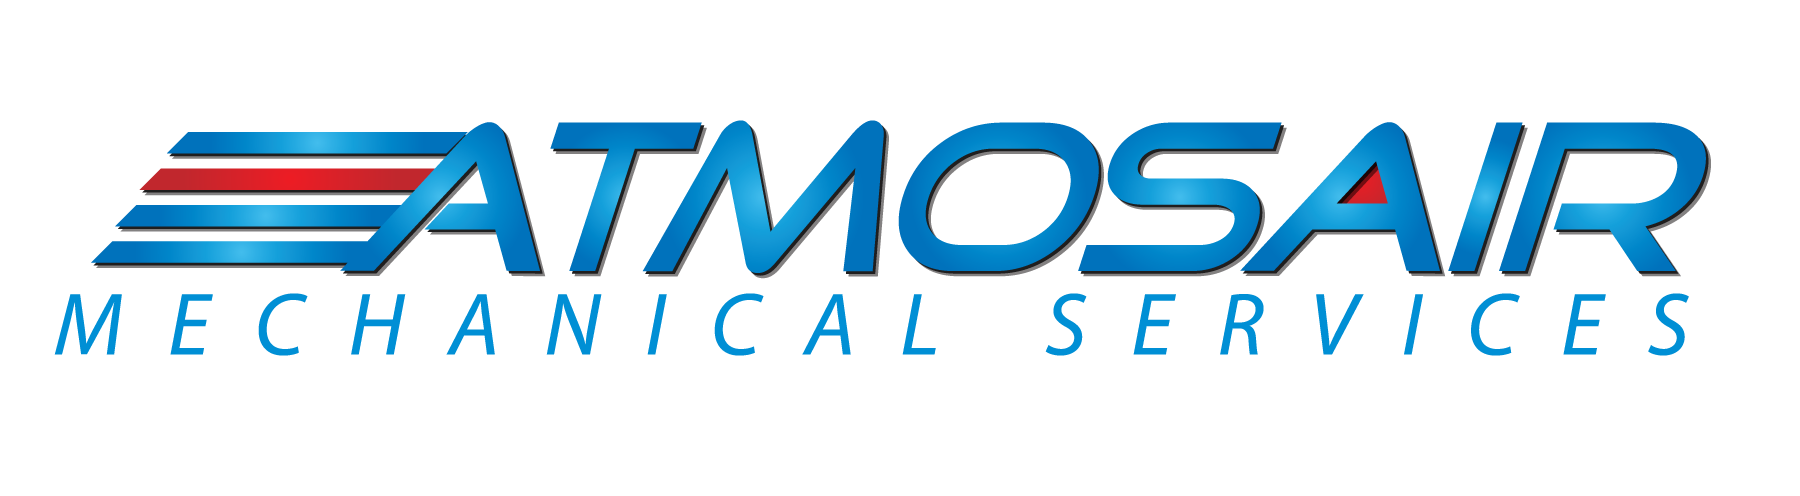 Atmosair Limited